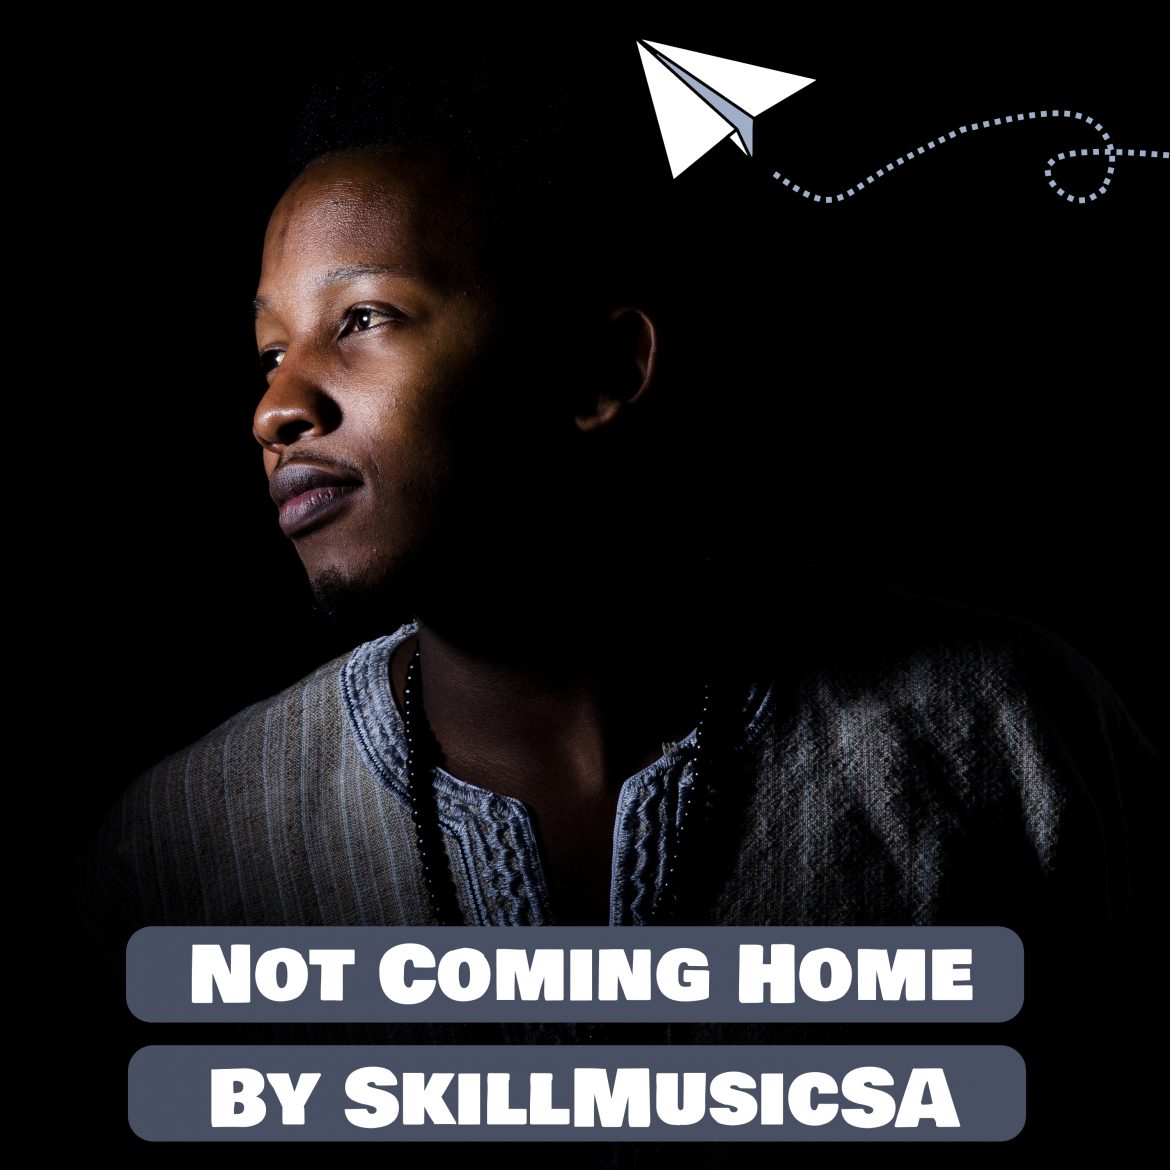 SkillMusicSA is Not Coming Home. Brand New Single off the new EP is now PLAYLISTED High Rotation on Bafana FM. Tune in!